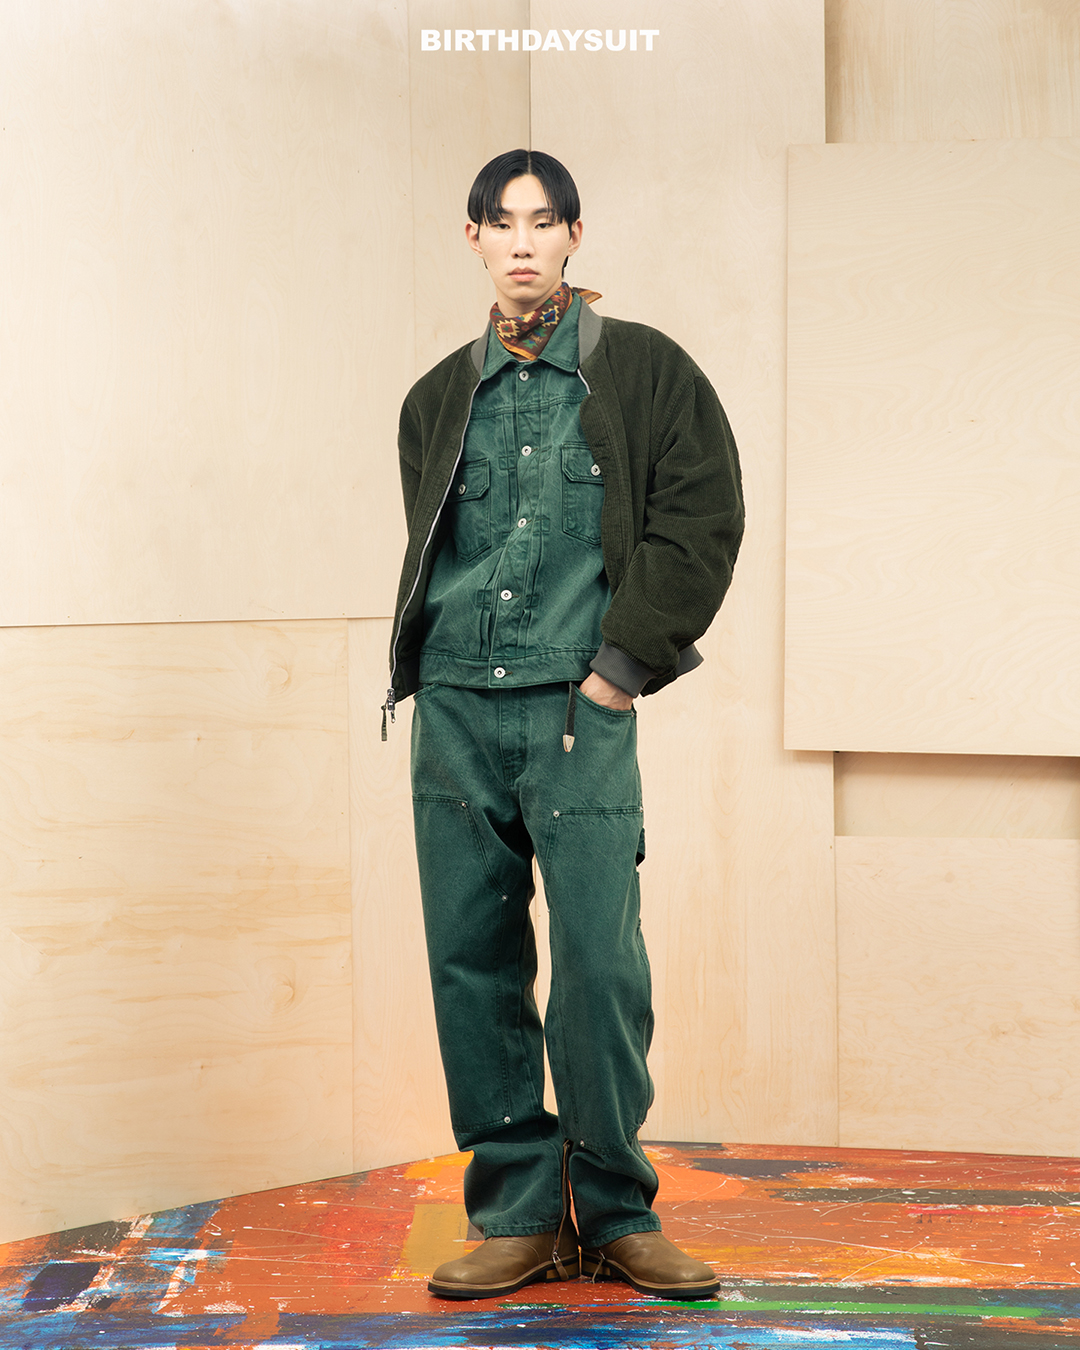 REVERSIBLE MA-1 (OLIVE)